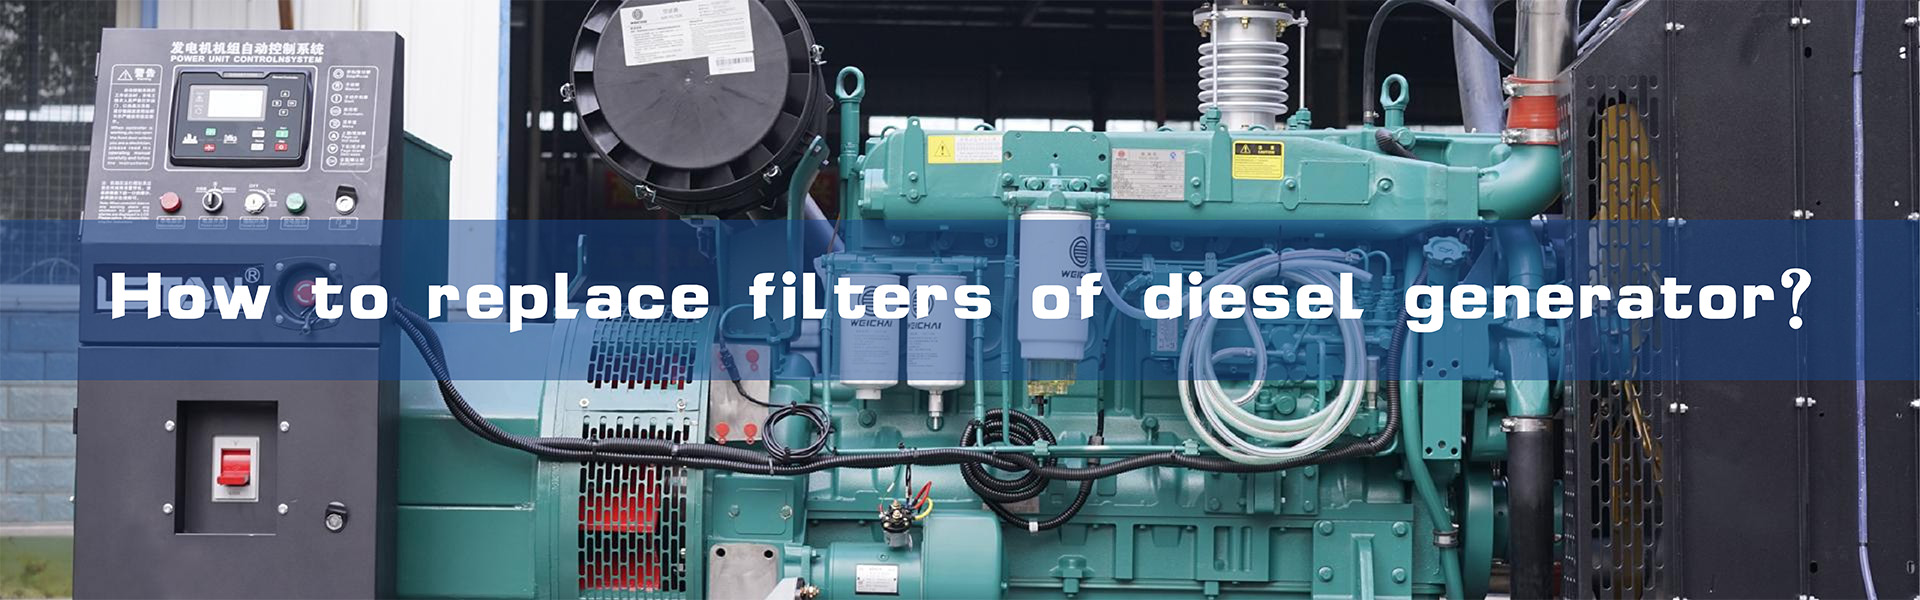 How to replace filter element of diesel generator?